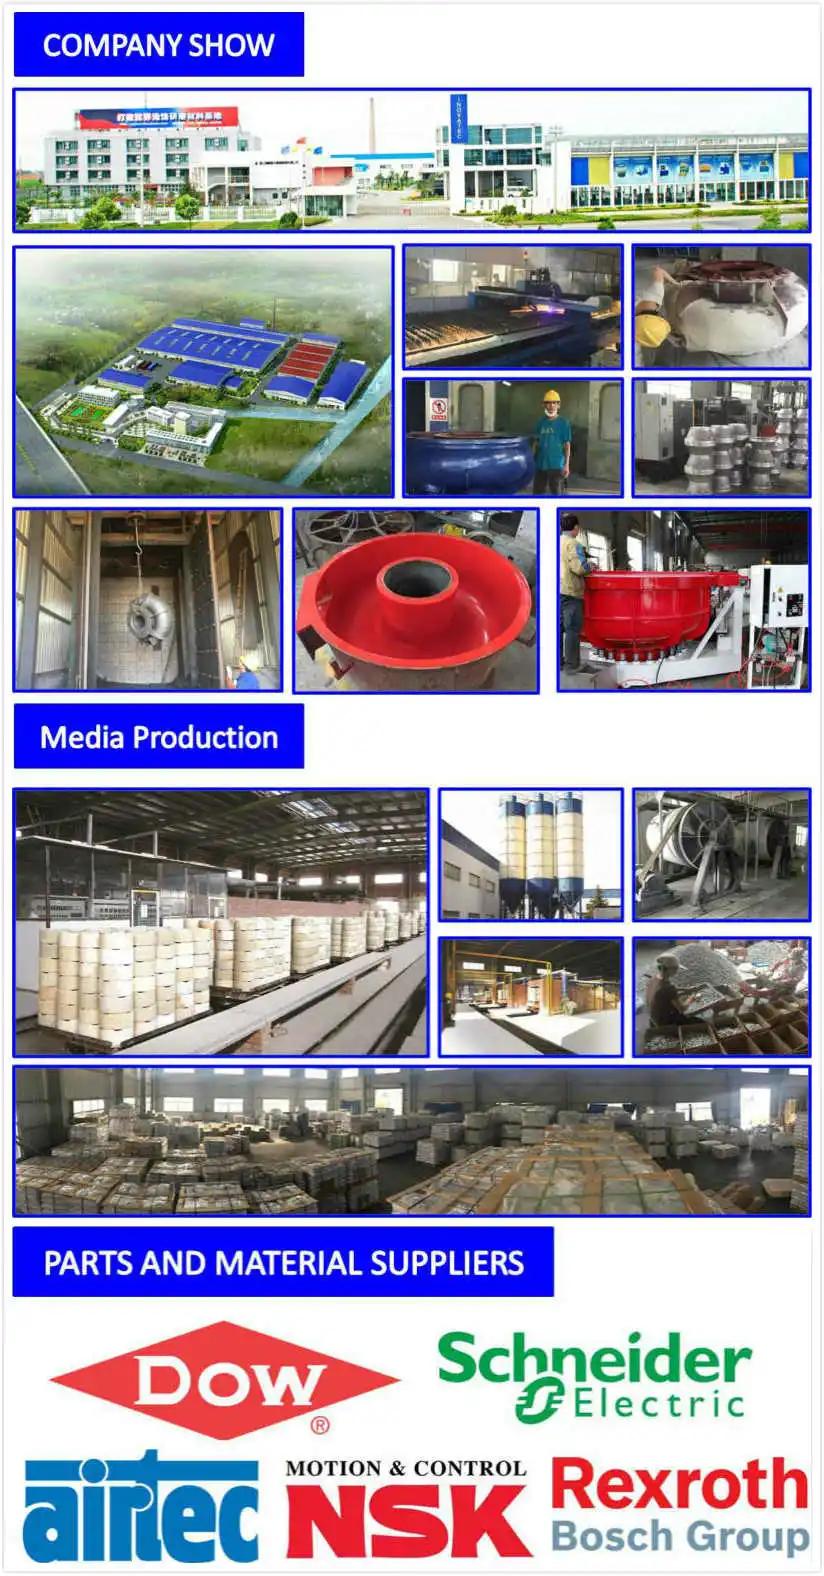 Screw Nails Springs Batch Stampings Processing Vibratory Grinding Finishing Machines